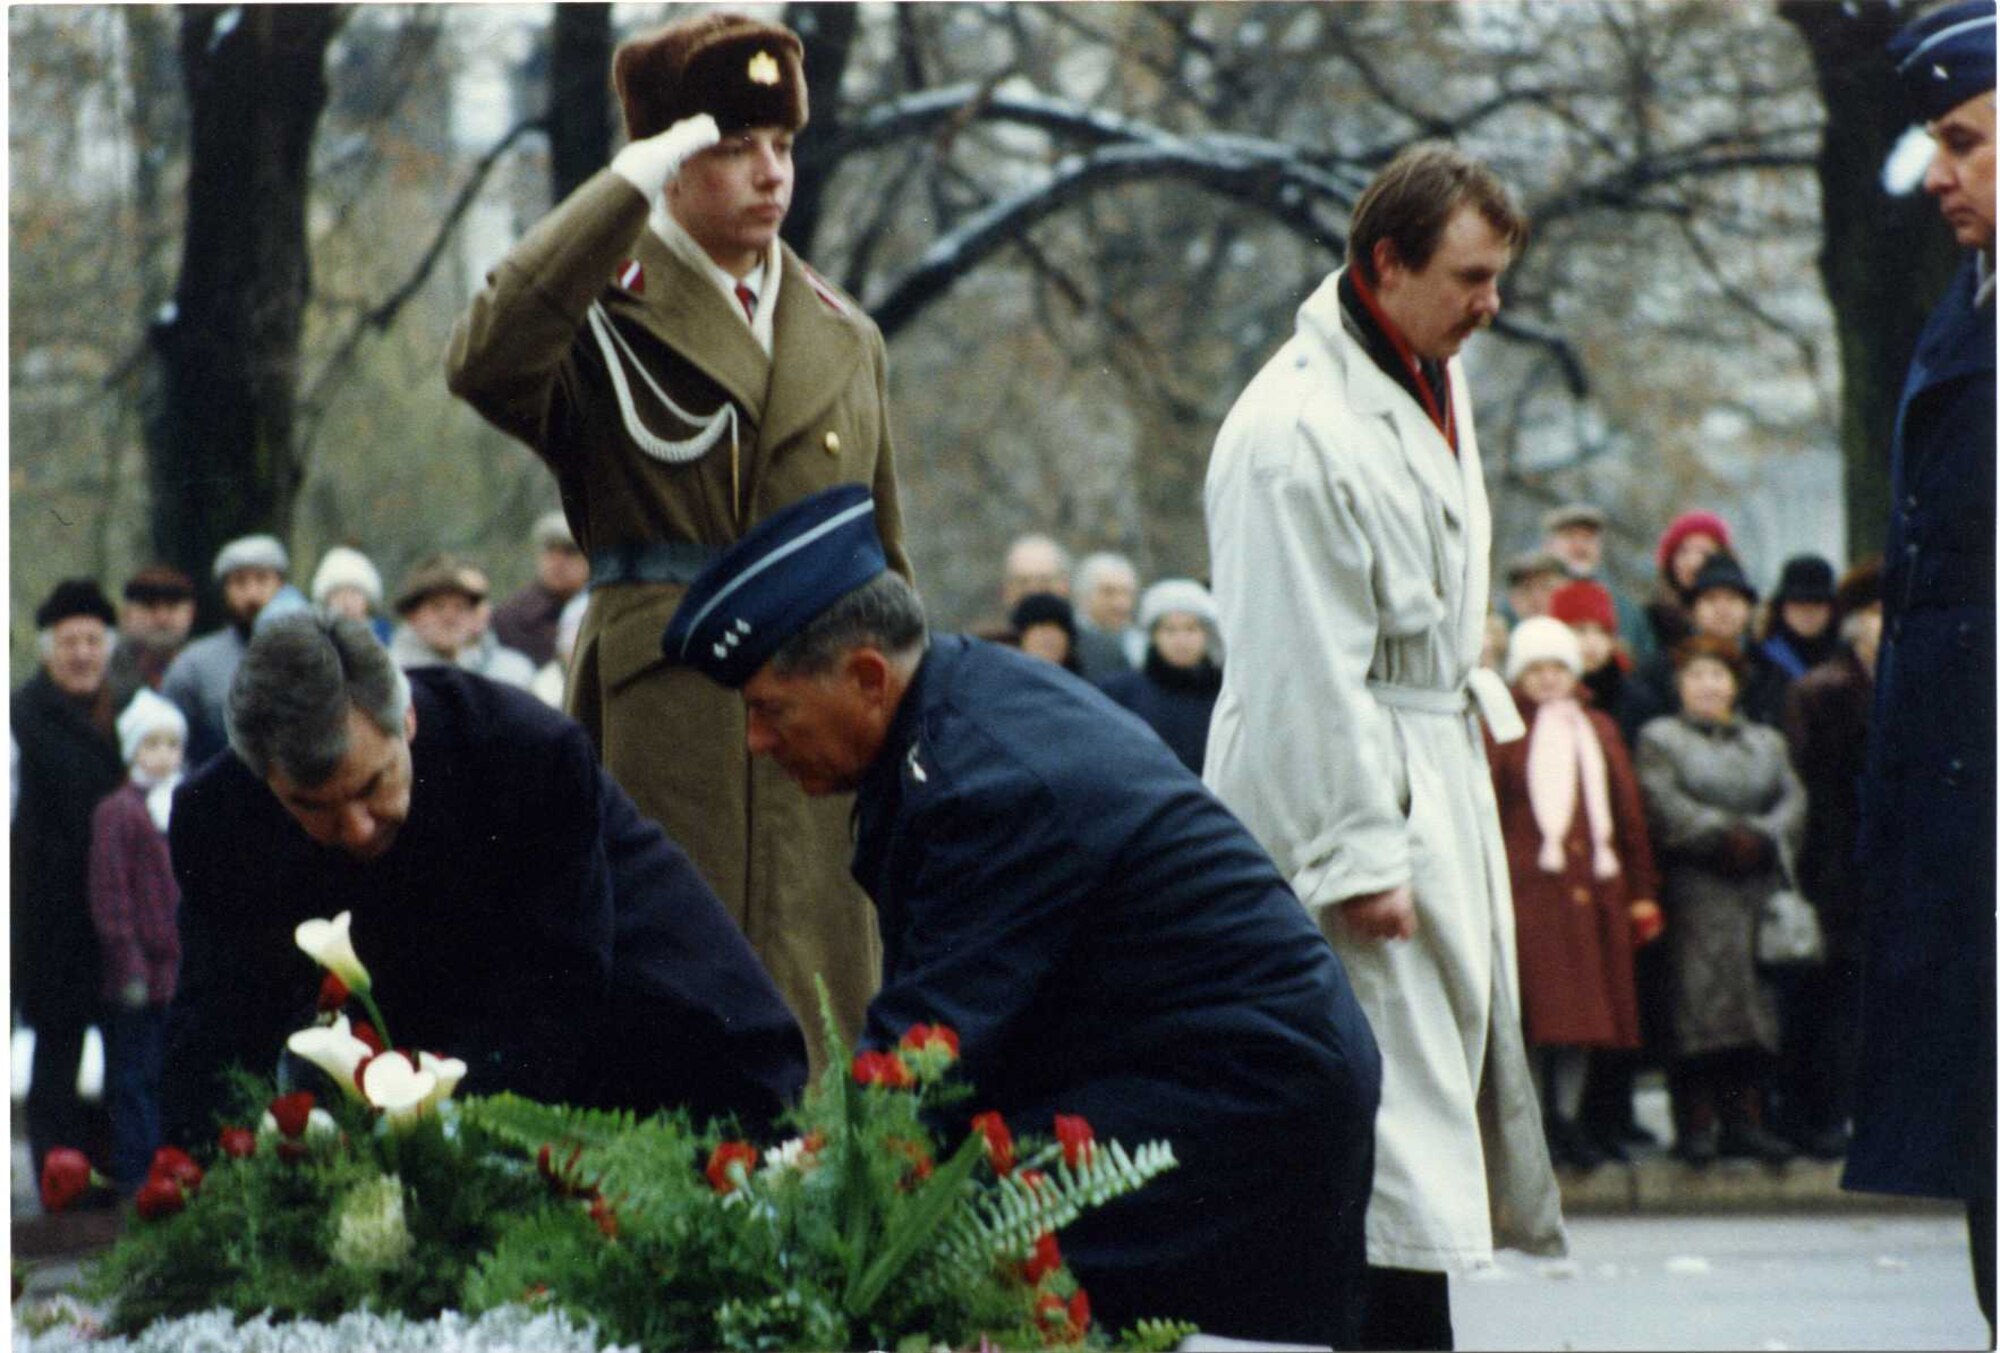 Lt. Gen. Conaway (center) lays a wreath at the Freedom Monument in Riga, Latvia, November 18, 1992, Latvian Independence Day.